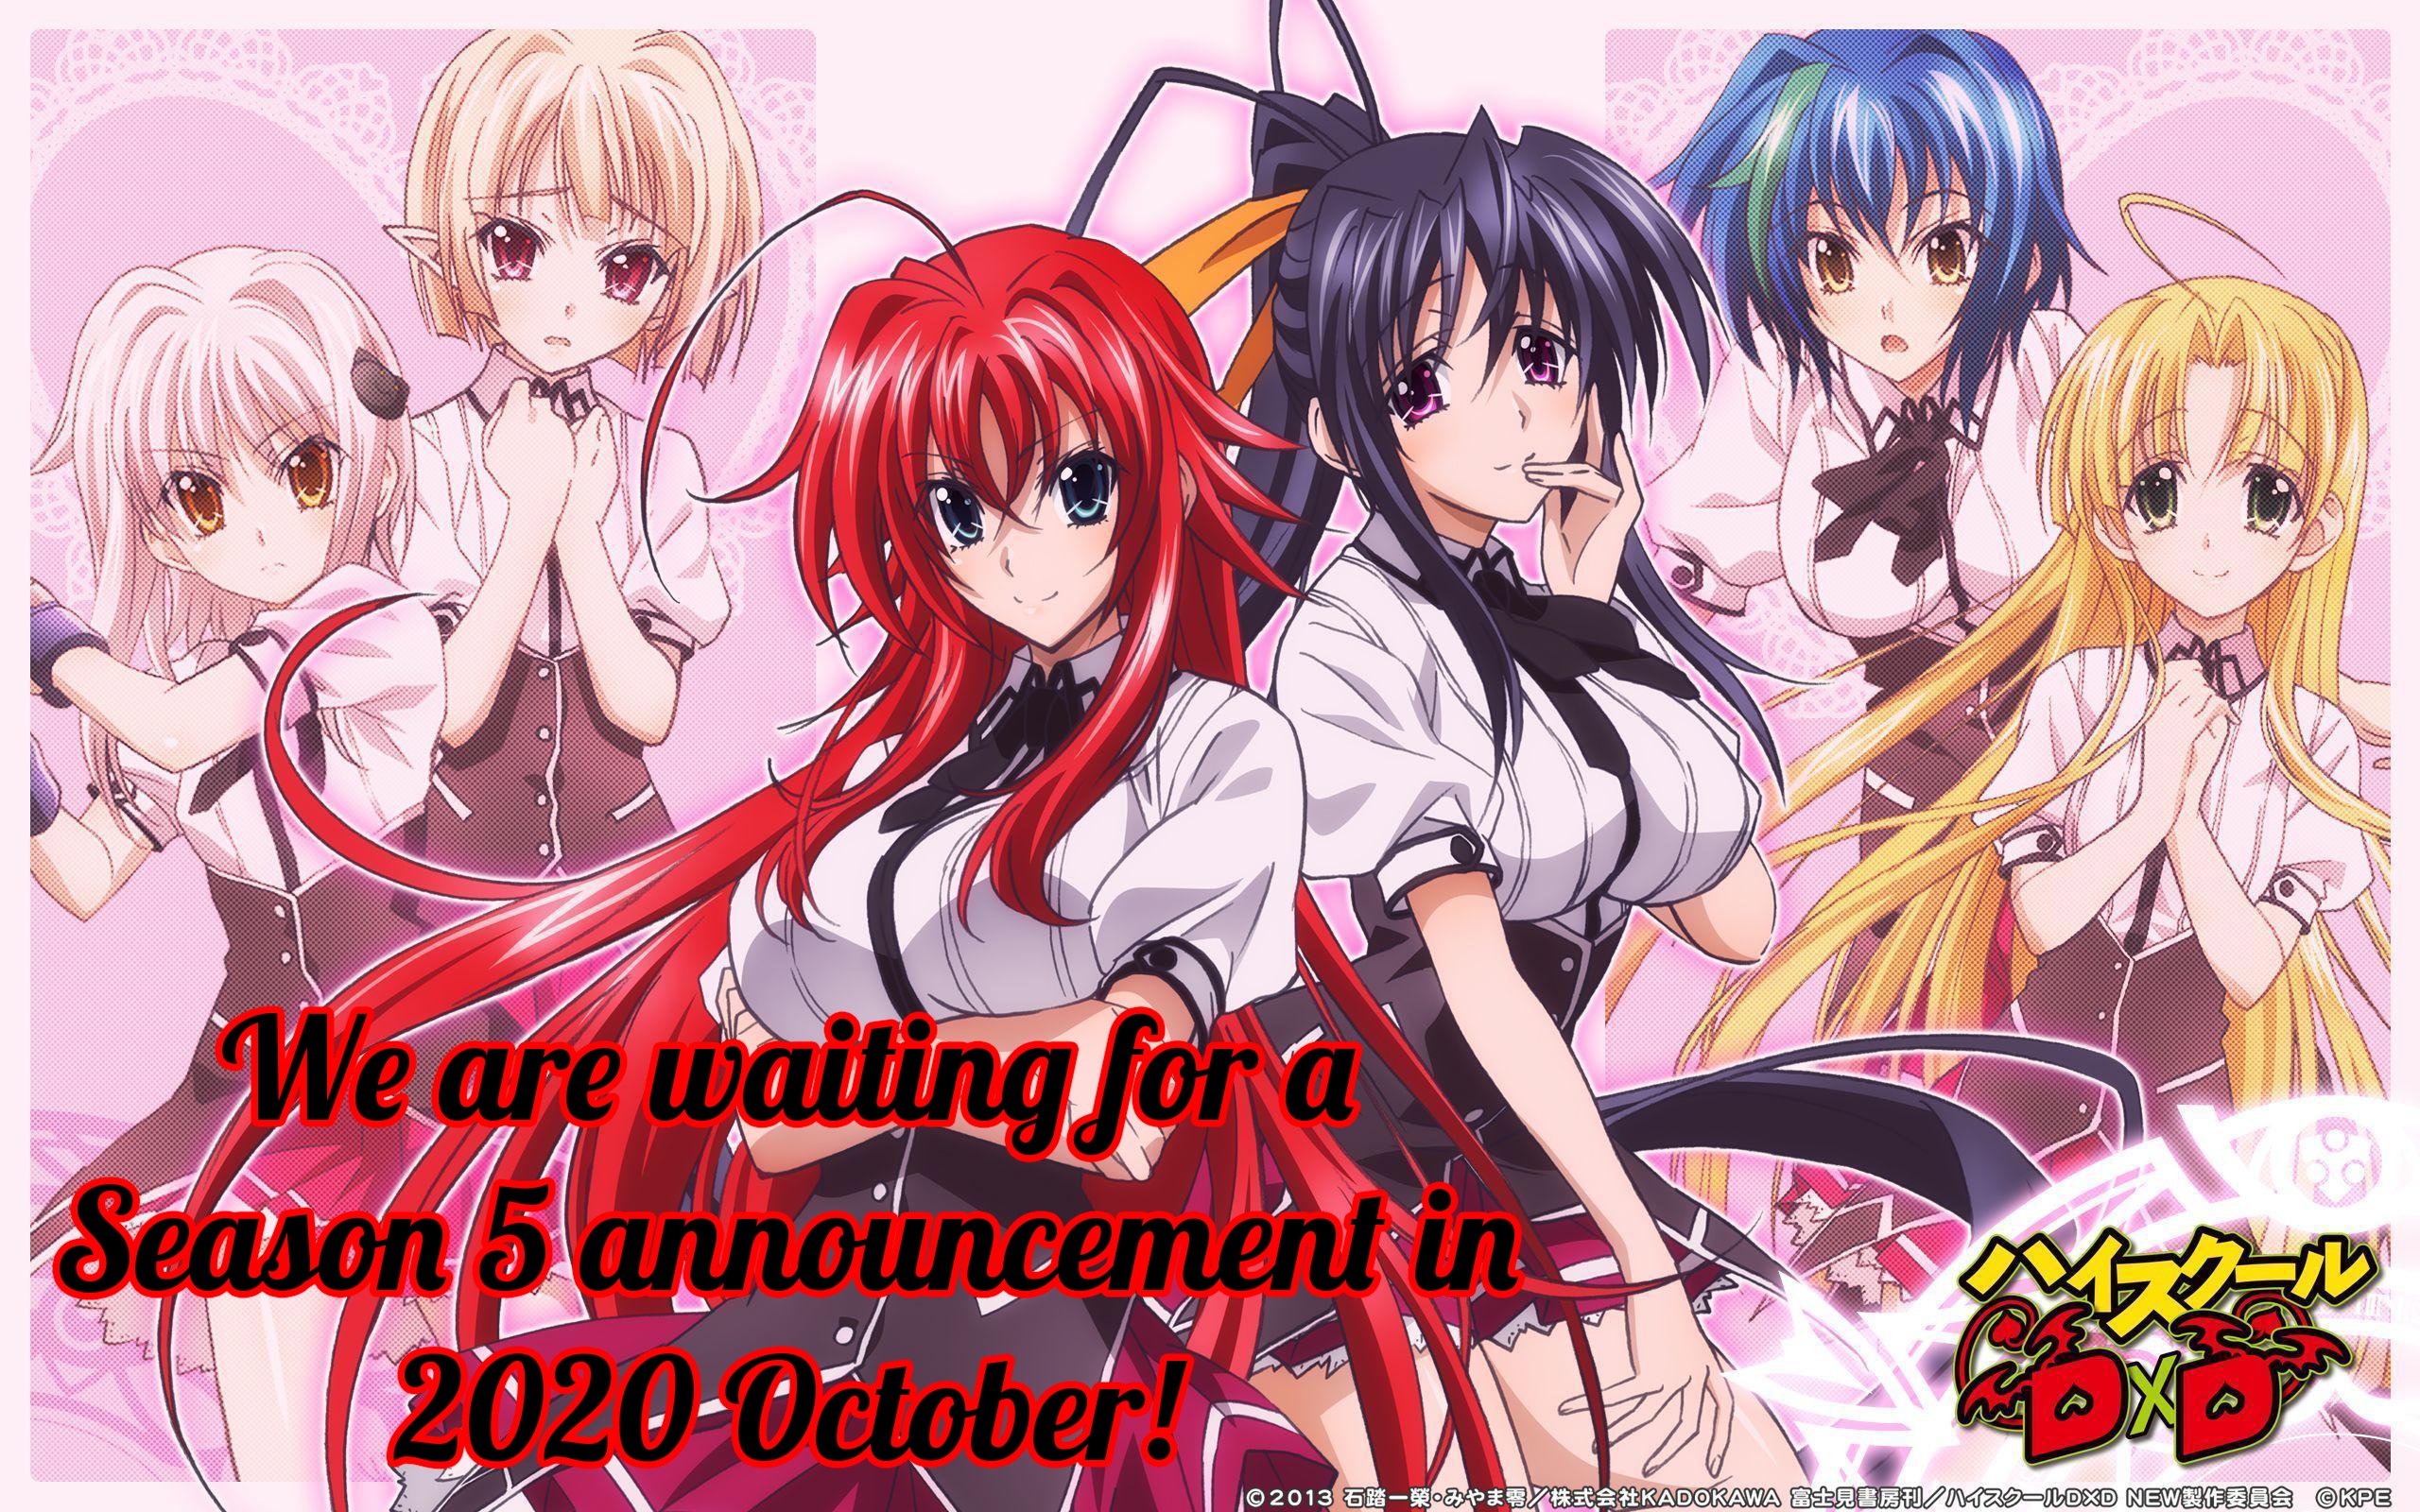 Will there be a season 5 of High School DXD? Release date